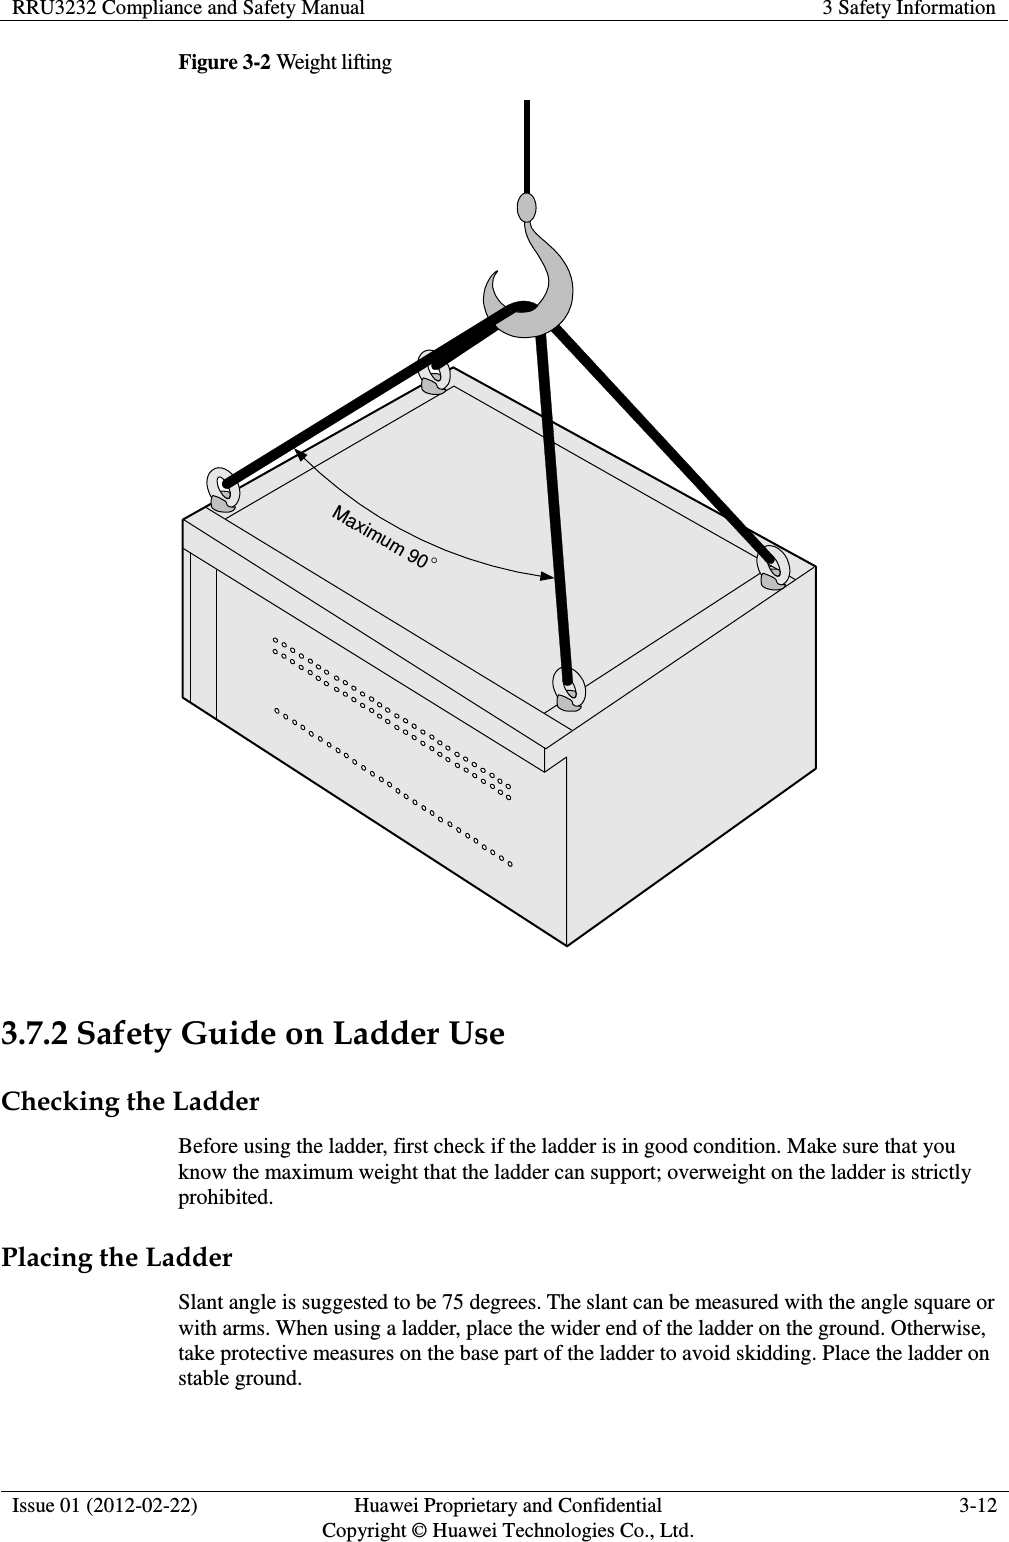 RRU3232 Compliance and Safety Manual 3 Safety Information  Issue 01 (2012-02-22) Huawei Proprietary and Confidential         Copyright © Huawei Technologies Co., Ltd. 3-12  Figure 3-2 Weight lifting Maximum 90  3.7.2 Safety Guide on Ladder Use Checking the Ladder Before using the ladder, first check if the ladder is in good condition. Make sure that you know the maximum weight that the ladder can support; overweight on the ladder is strictly prohibited. Placing the Ladder Slant angle is suggested to be 75 degrees. The slant can be measured with the angle square or with arms. When using a ladder, place the wider end of the ladder on the ground. Otherwise, take protective measures on the base part of the ladder to avoid skidding. Place the ladder on stable ground. 